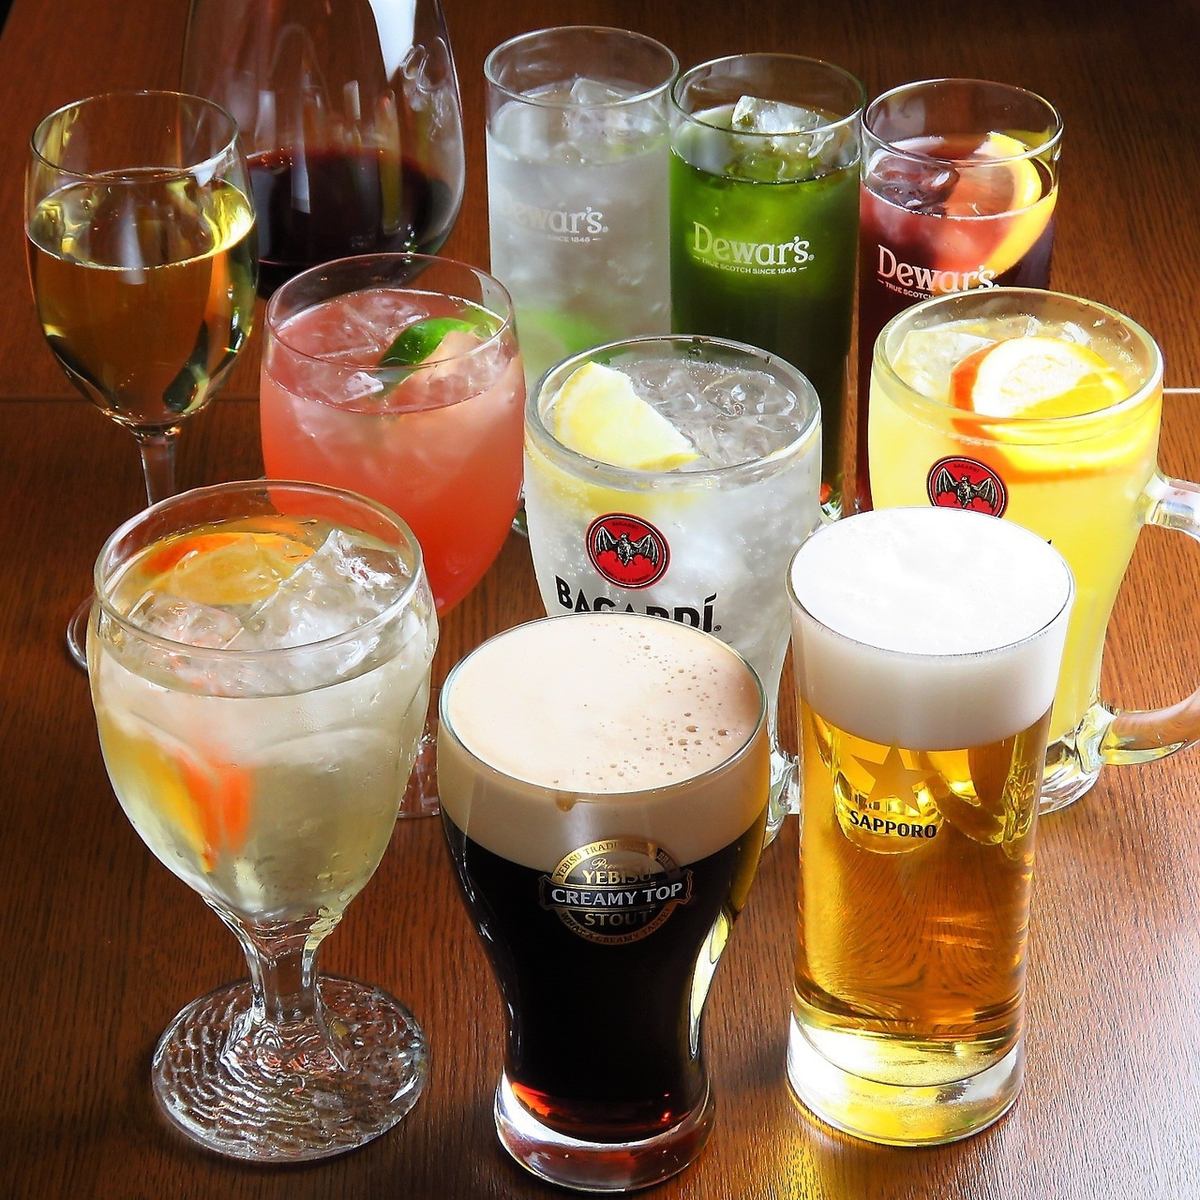 We have the popular all-you-can-drink!